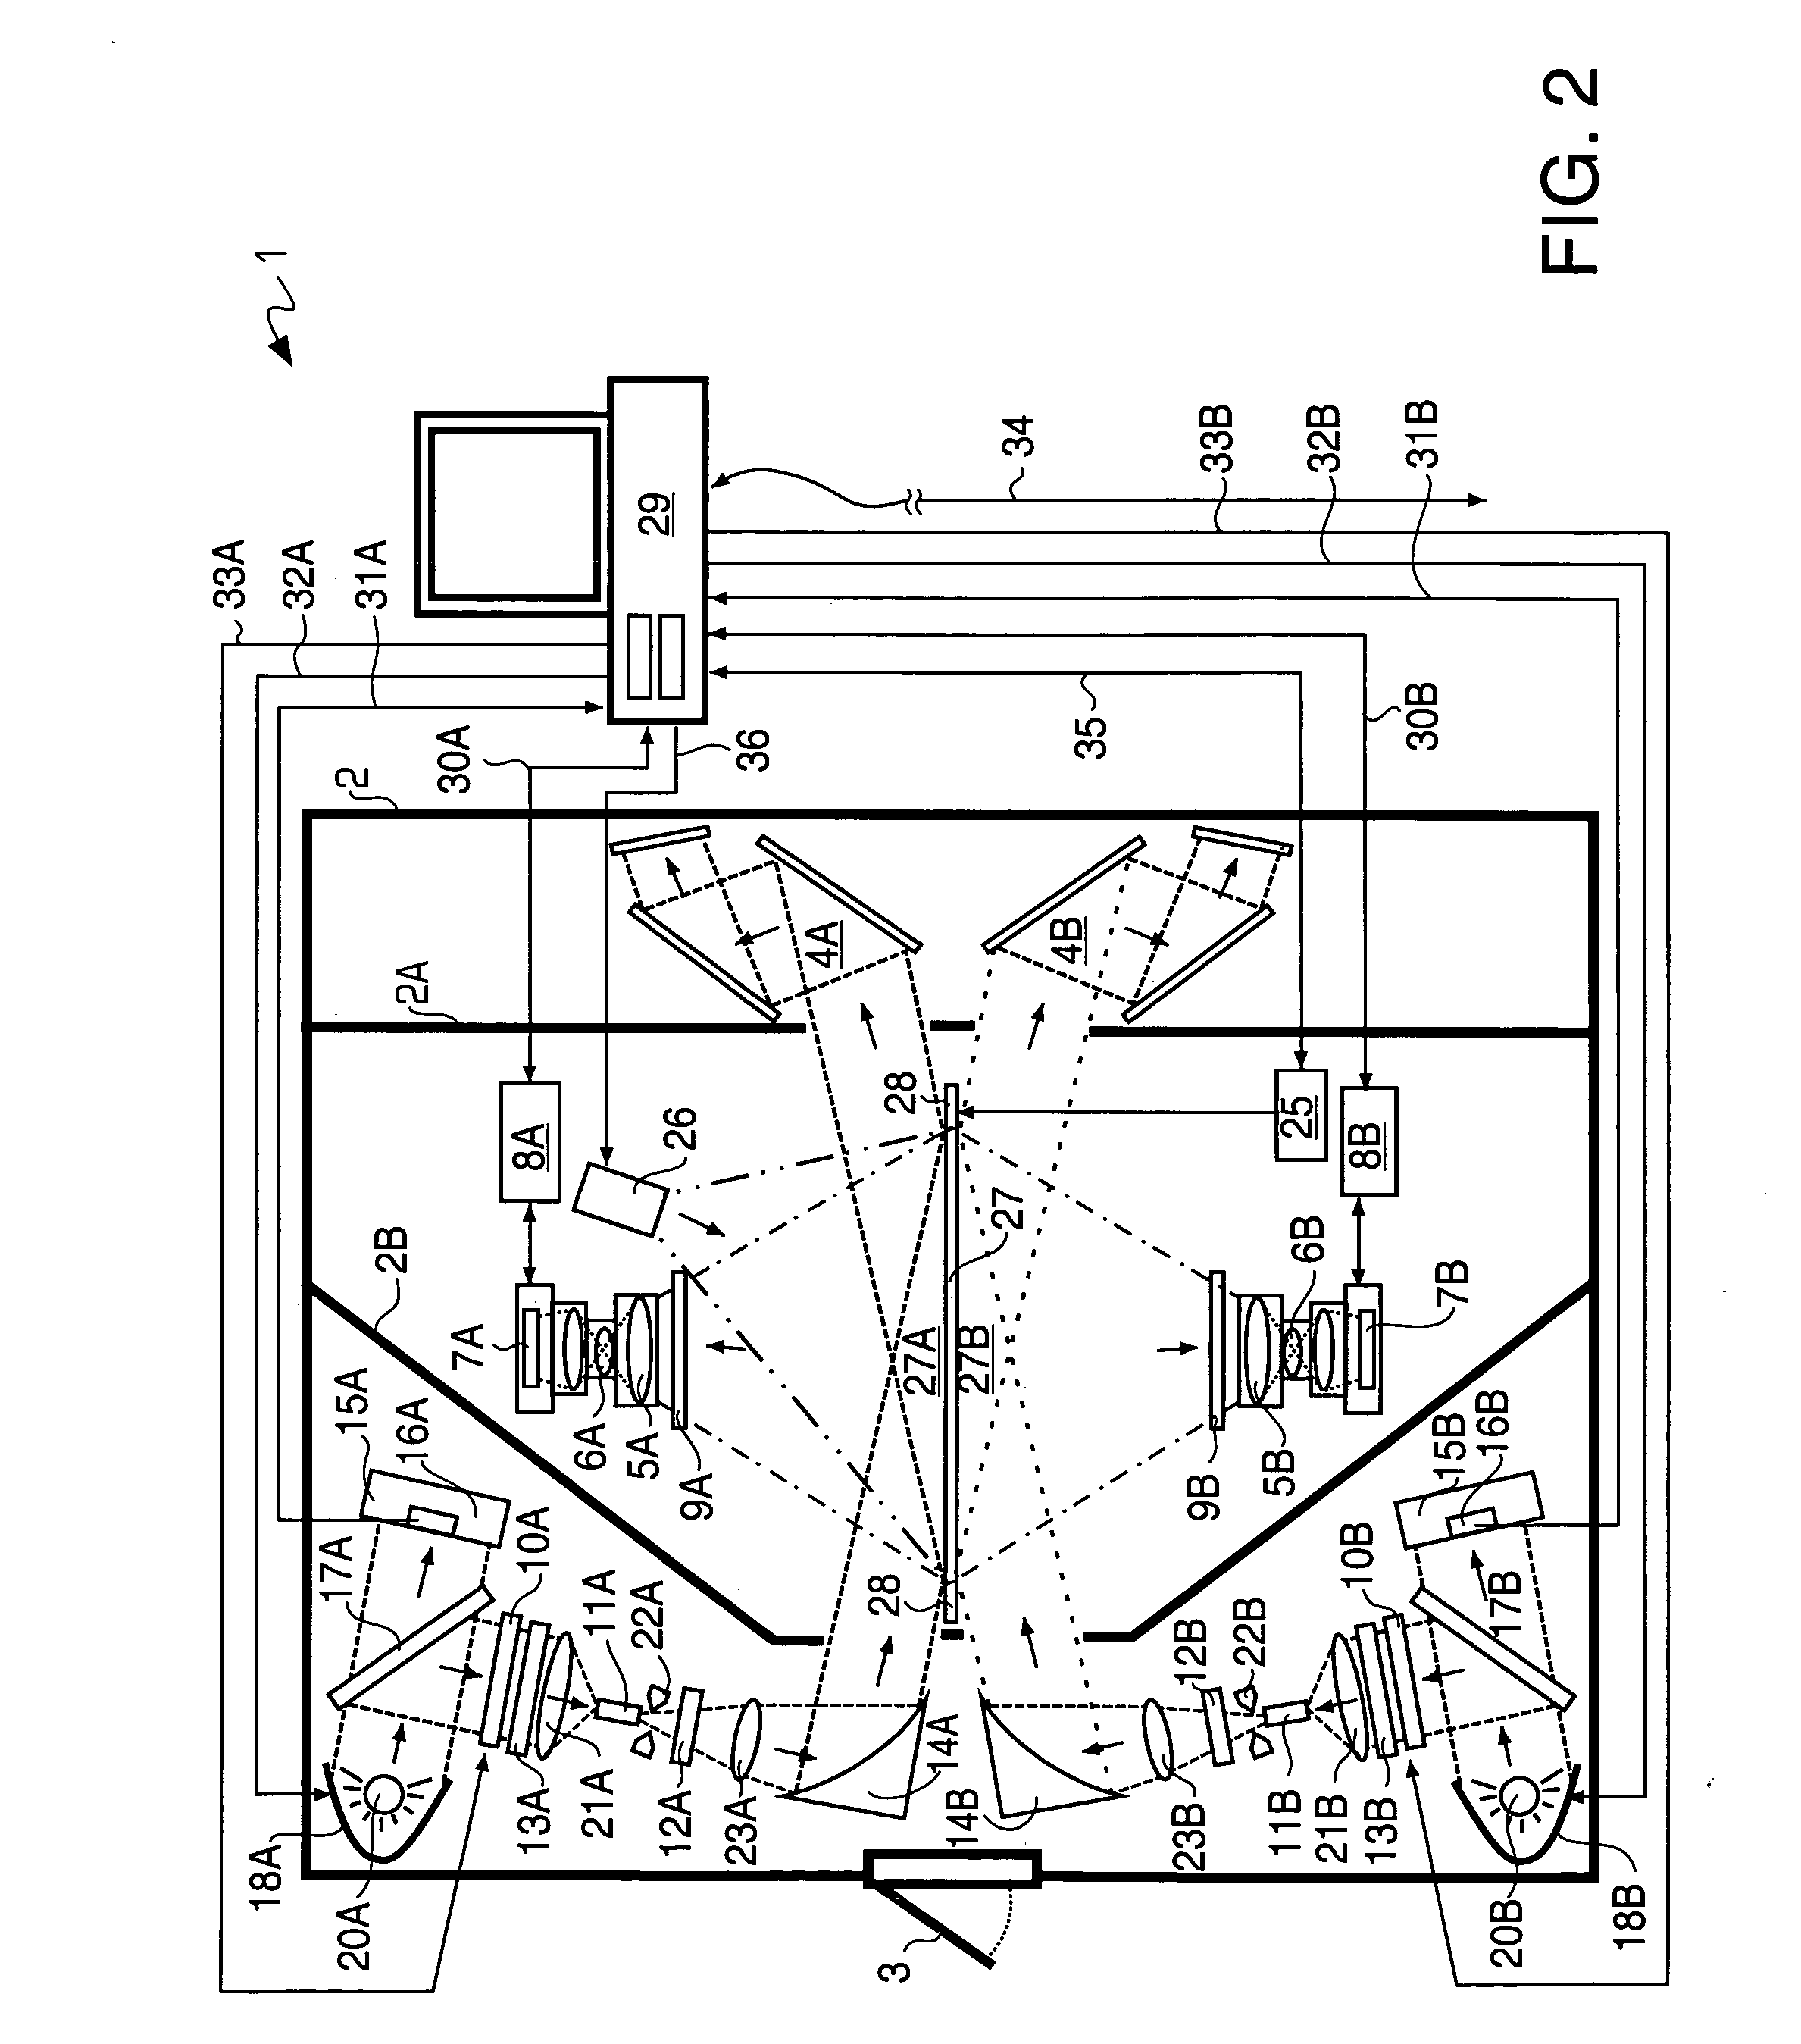 Method and apparatus for illuminating a substrate during inspection